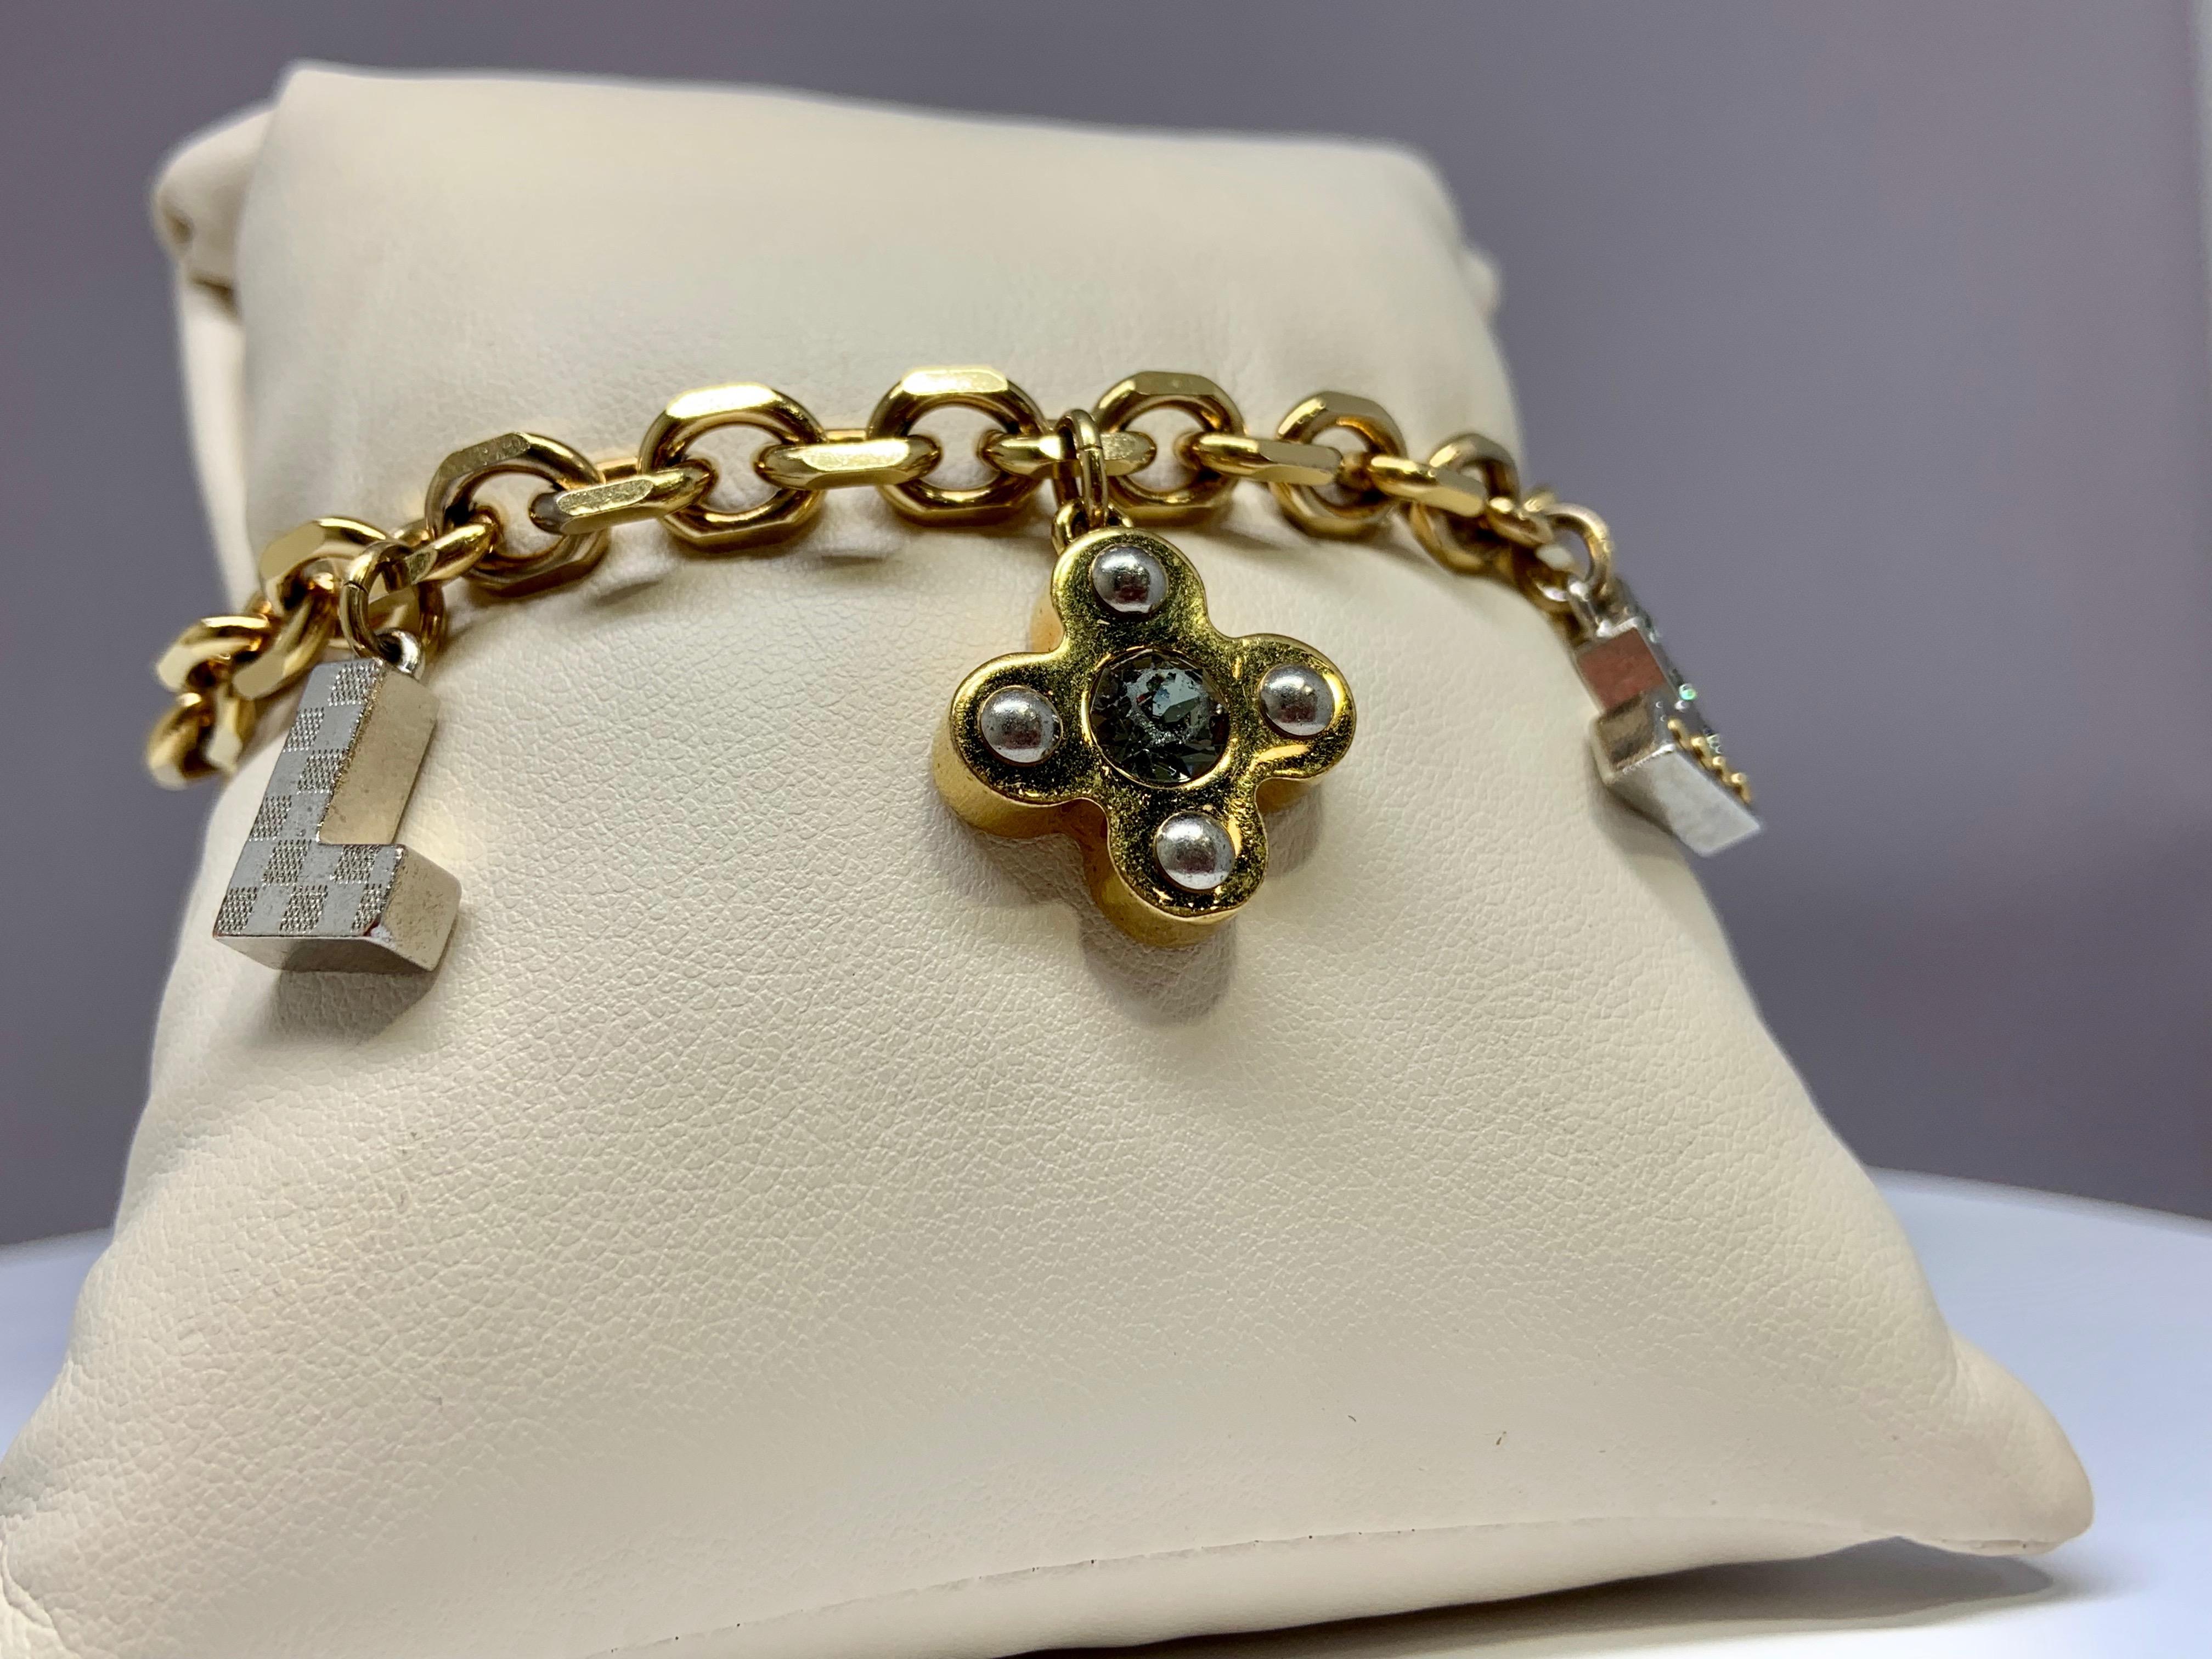 This gently used Louis Vuitton charm bracelet is gold plated and includes 3 large charms. The bracelet is 8.5 inches long and includes a large lobster claw clasp for ultimate security. This bracelet features 4 Cubic Zirconia stones on 2 of the three